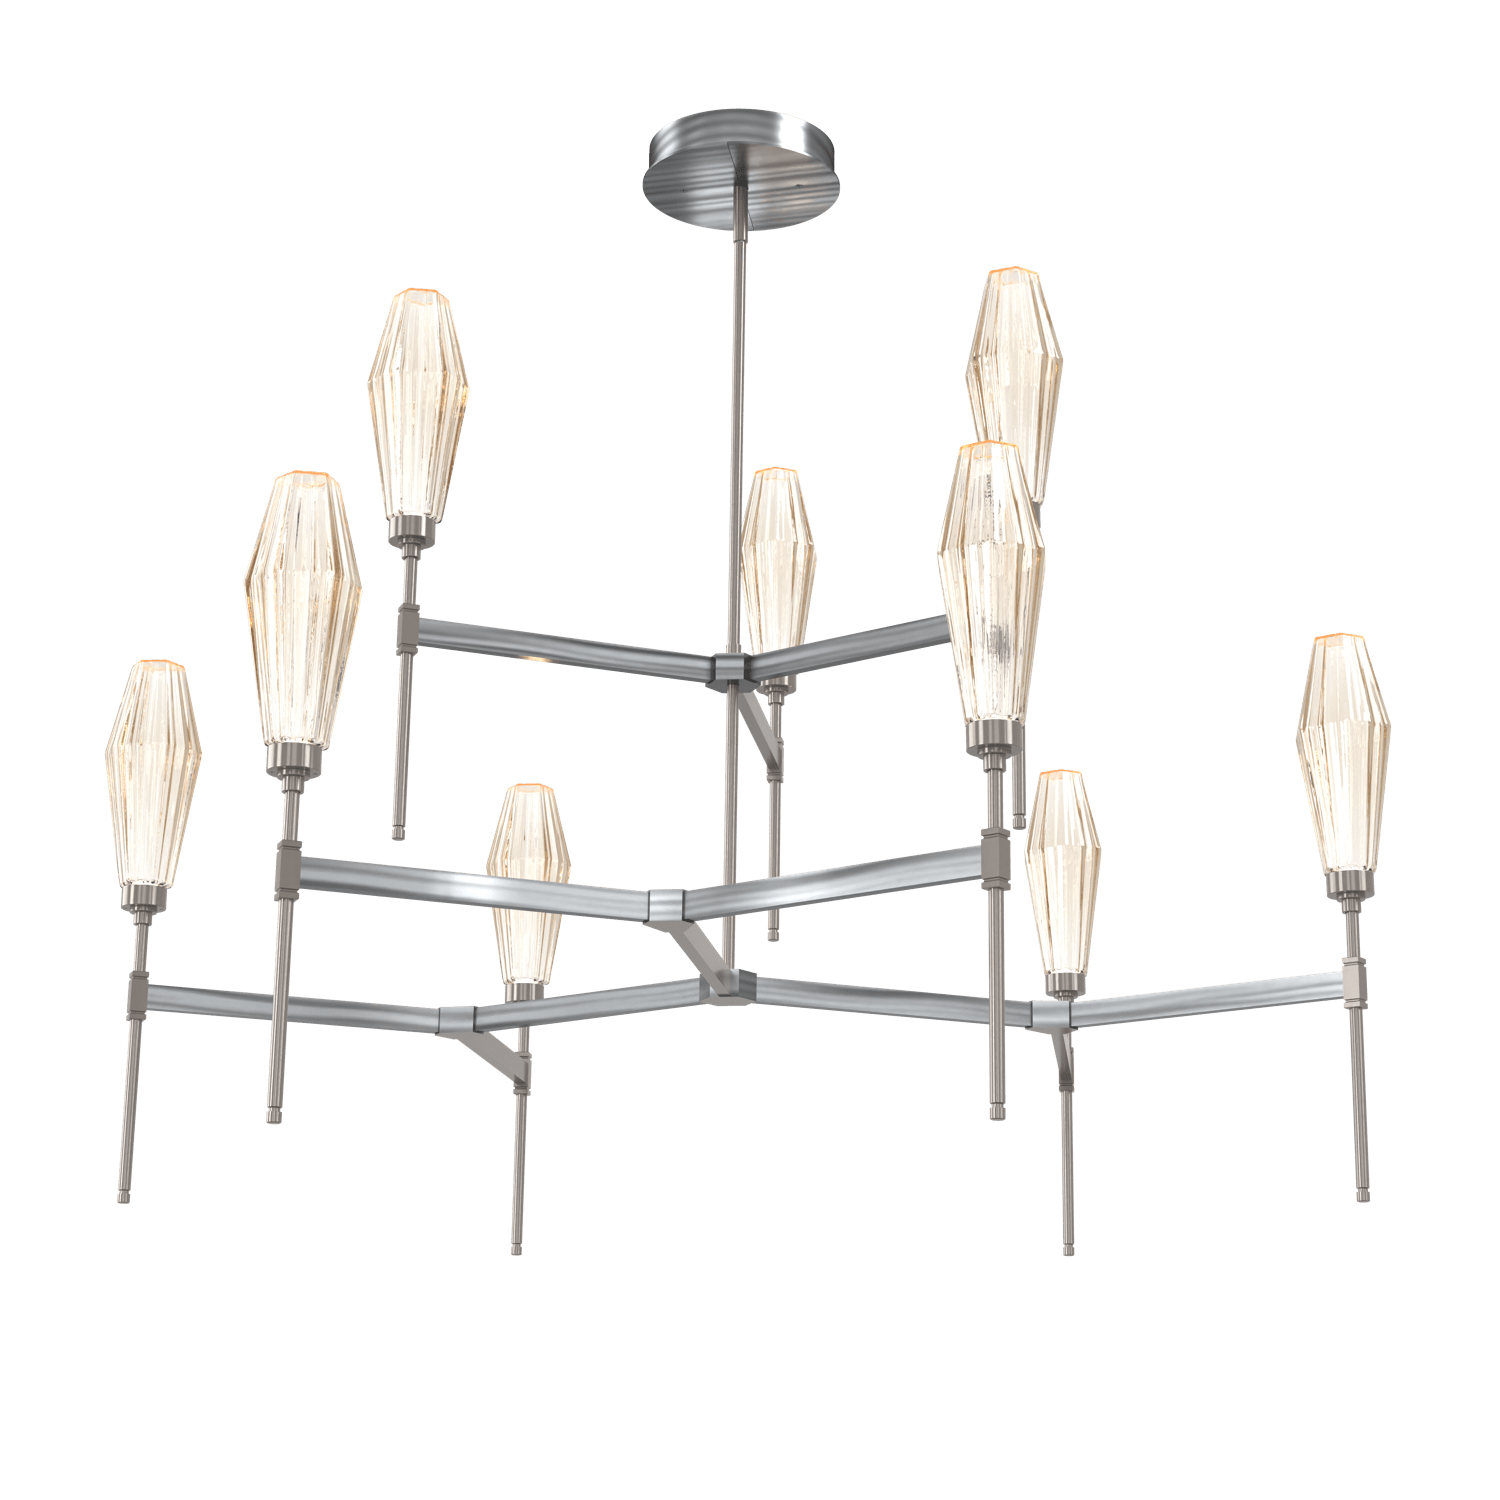 CHB0049-54-GM-RA-Hammerton-Studio-Aalto-54-inch-round-two-tier-belvedere-chandelier-with-gunmetal-finish-and-optic-ribbed-amber-glass-shades-and-LED-lamping